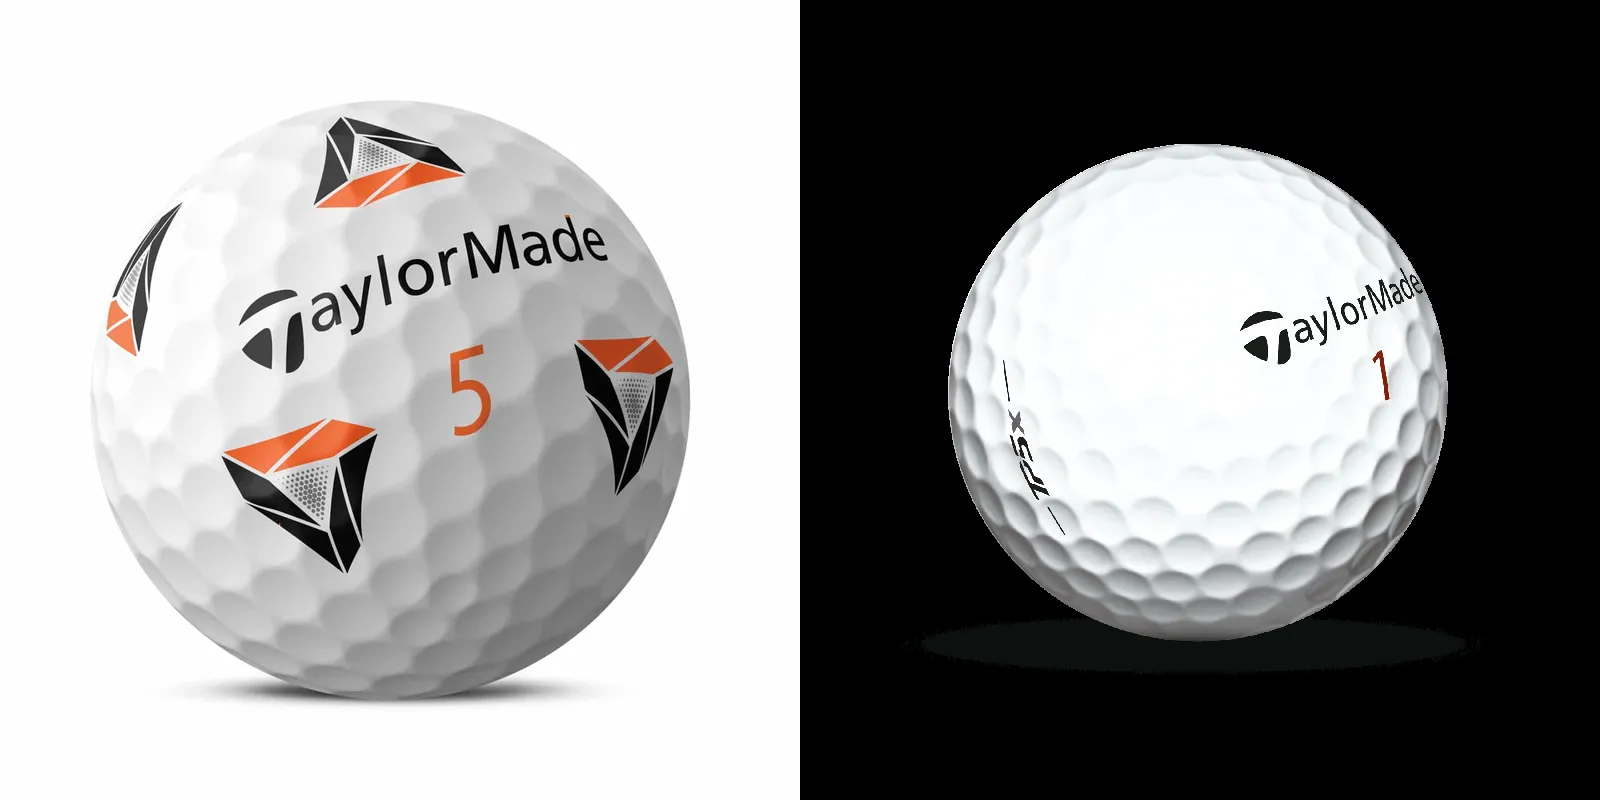 The introduction of Taylormade Golf Ball